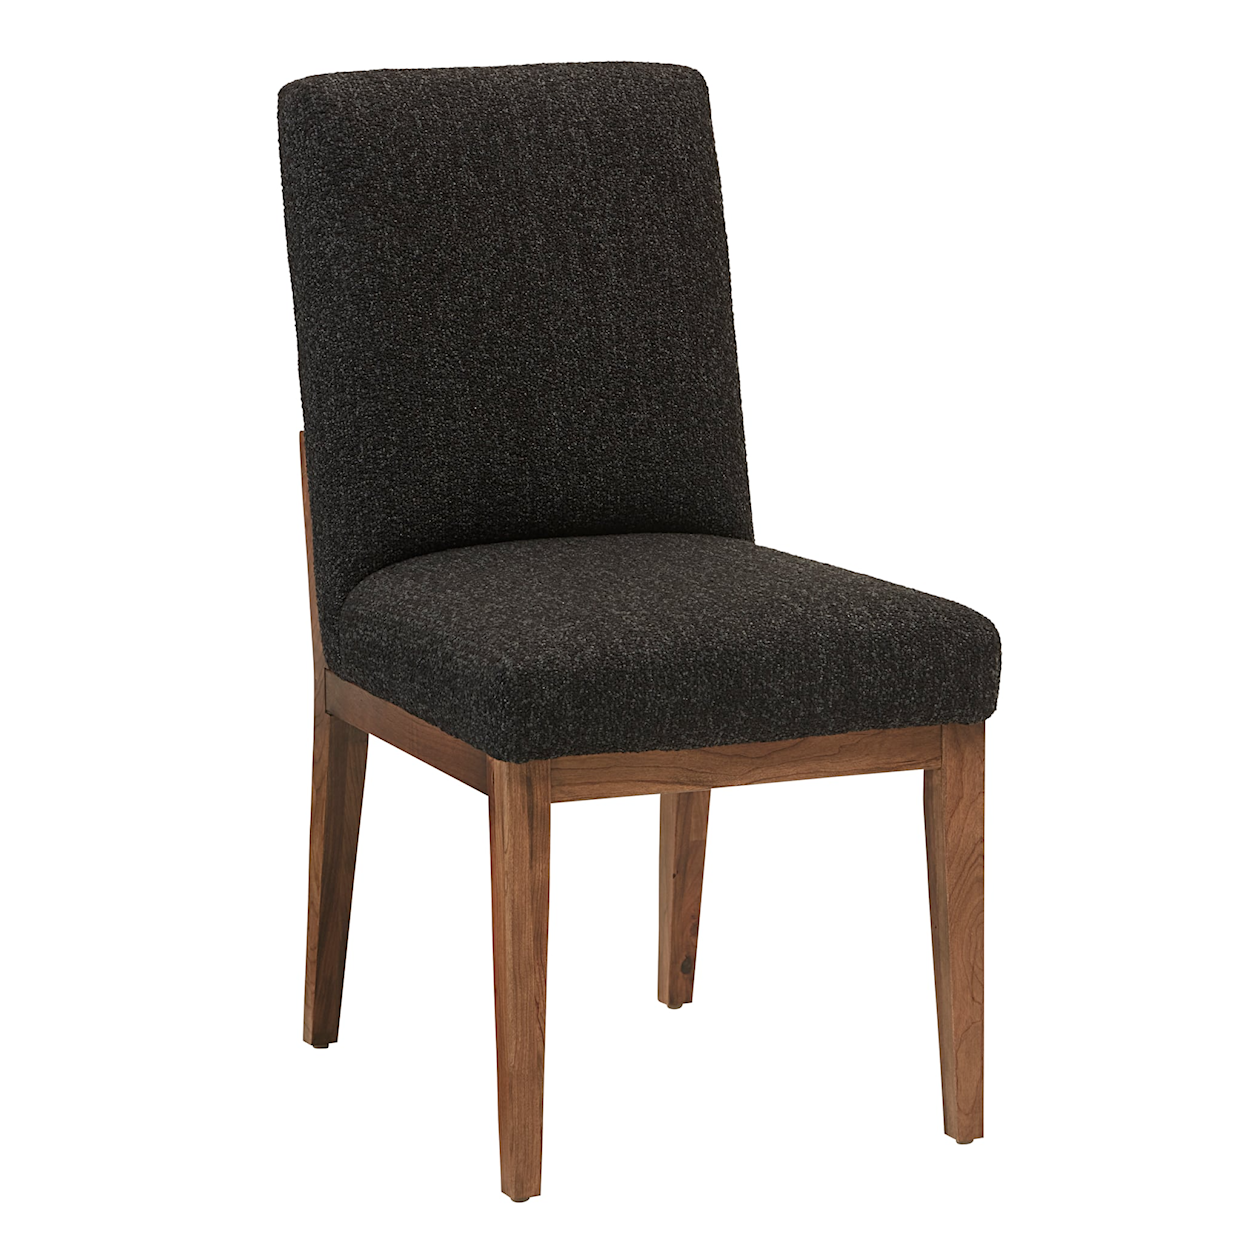 Virginia House Crafted Cherry - Medium Upholstered Side Dining Chair